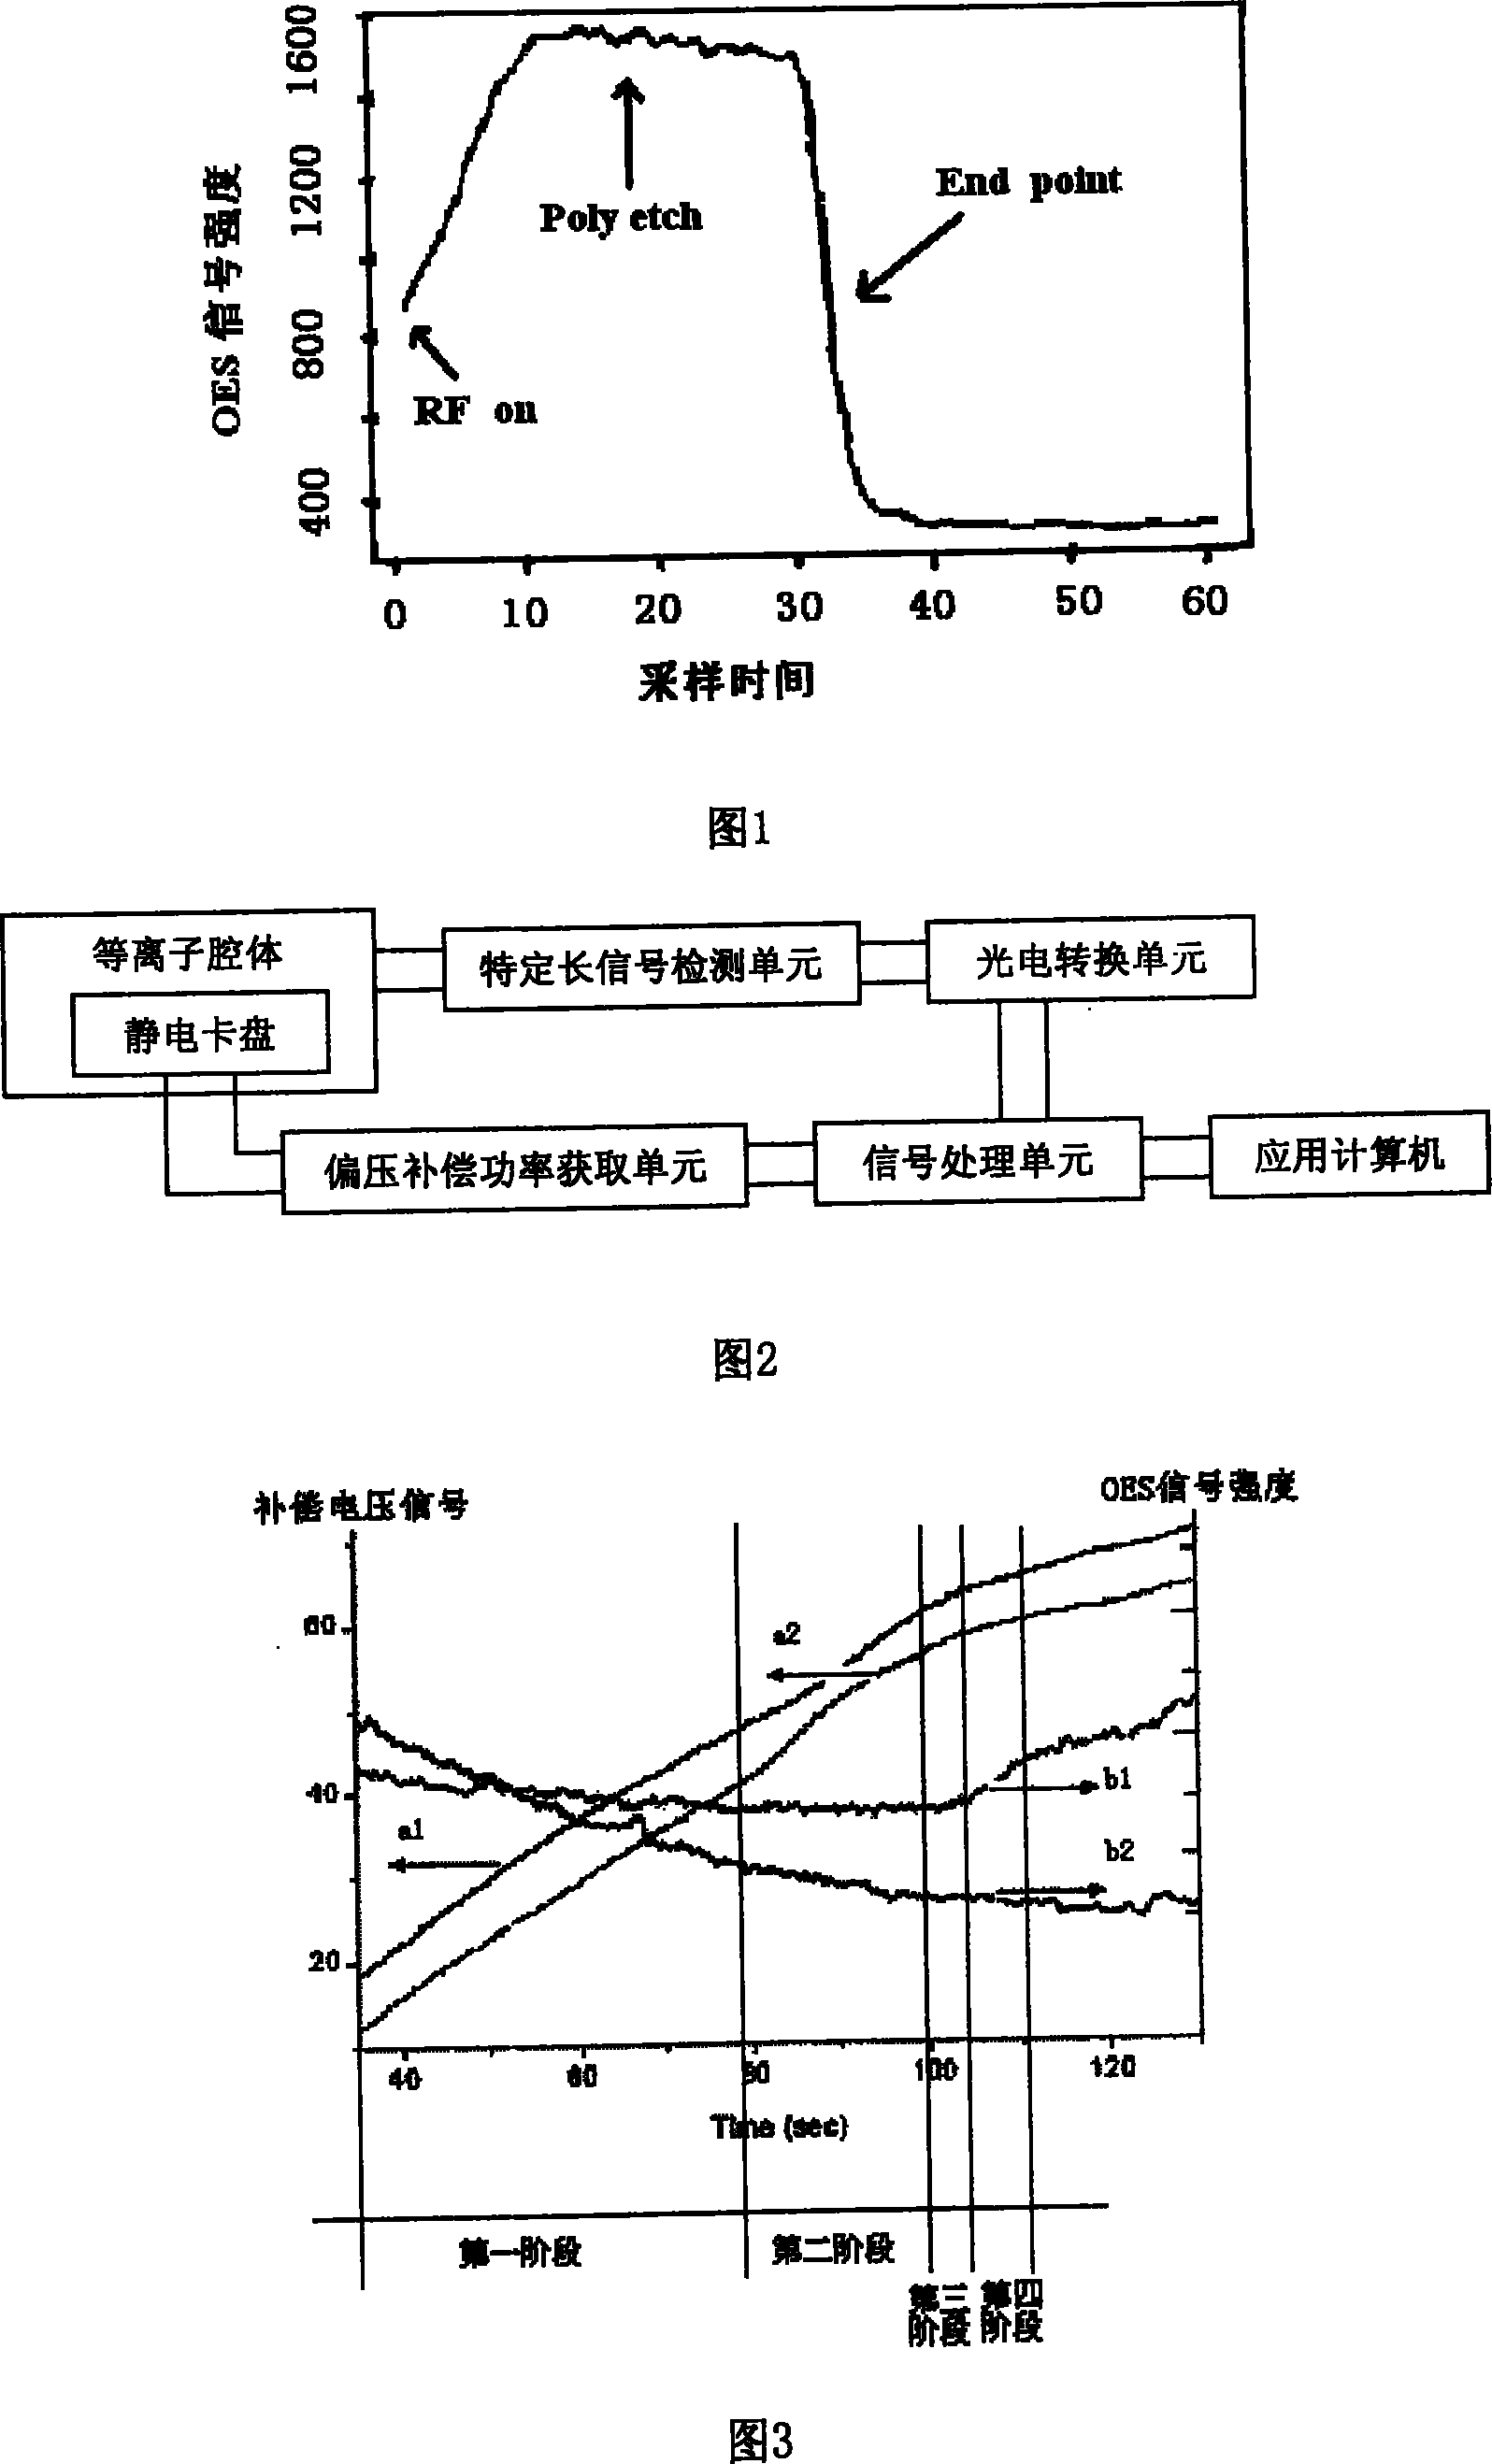 Method and apparatus for detecting polysilicon gate etching terminal